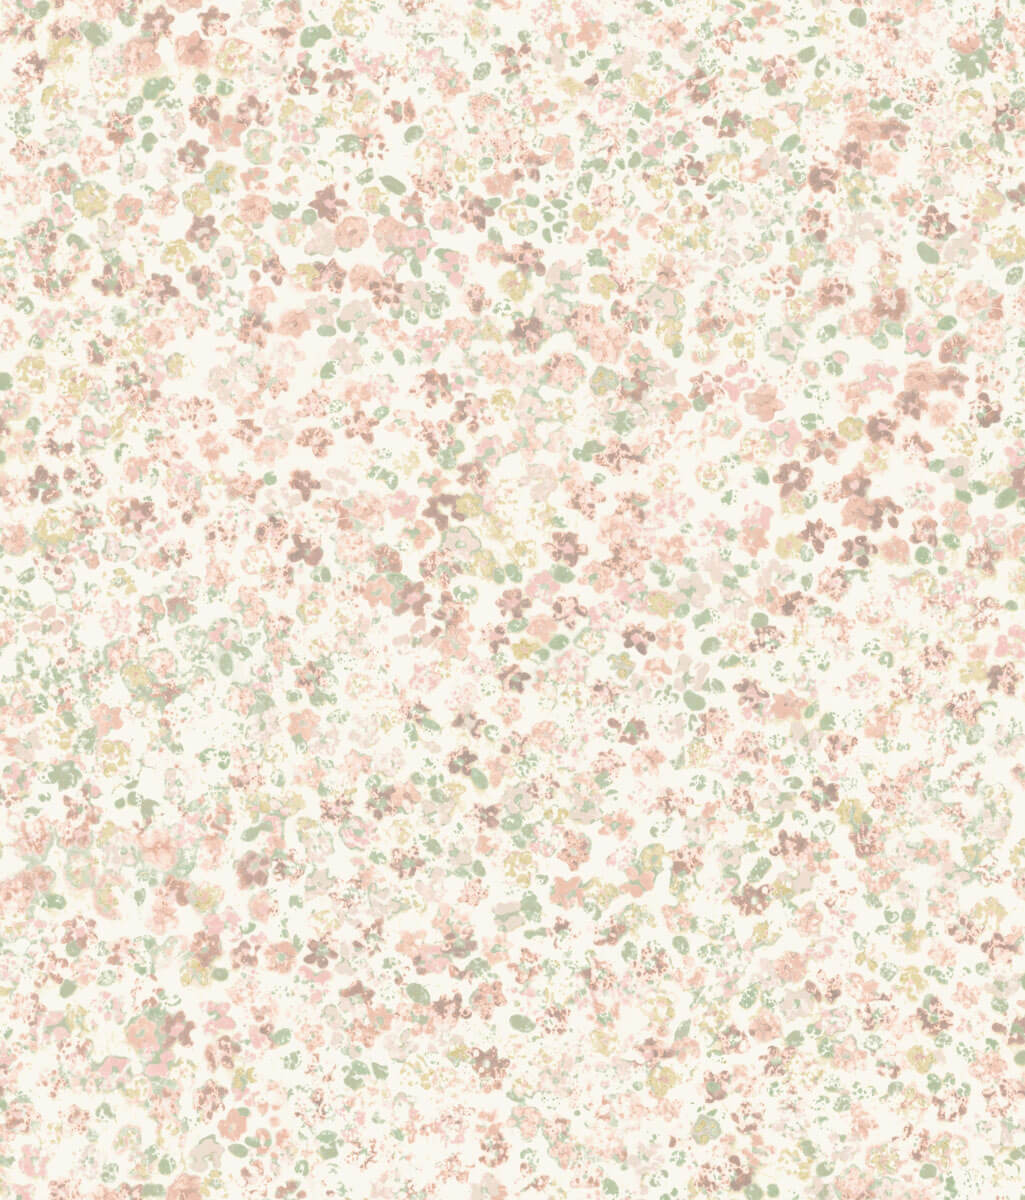 In A Field Of Roses Fabric, Wallpaper and Home Decor